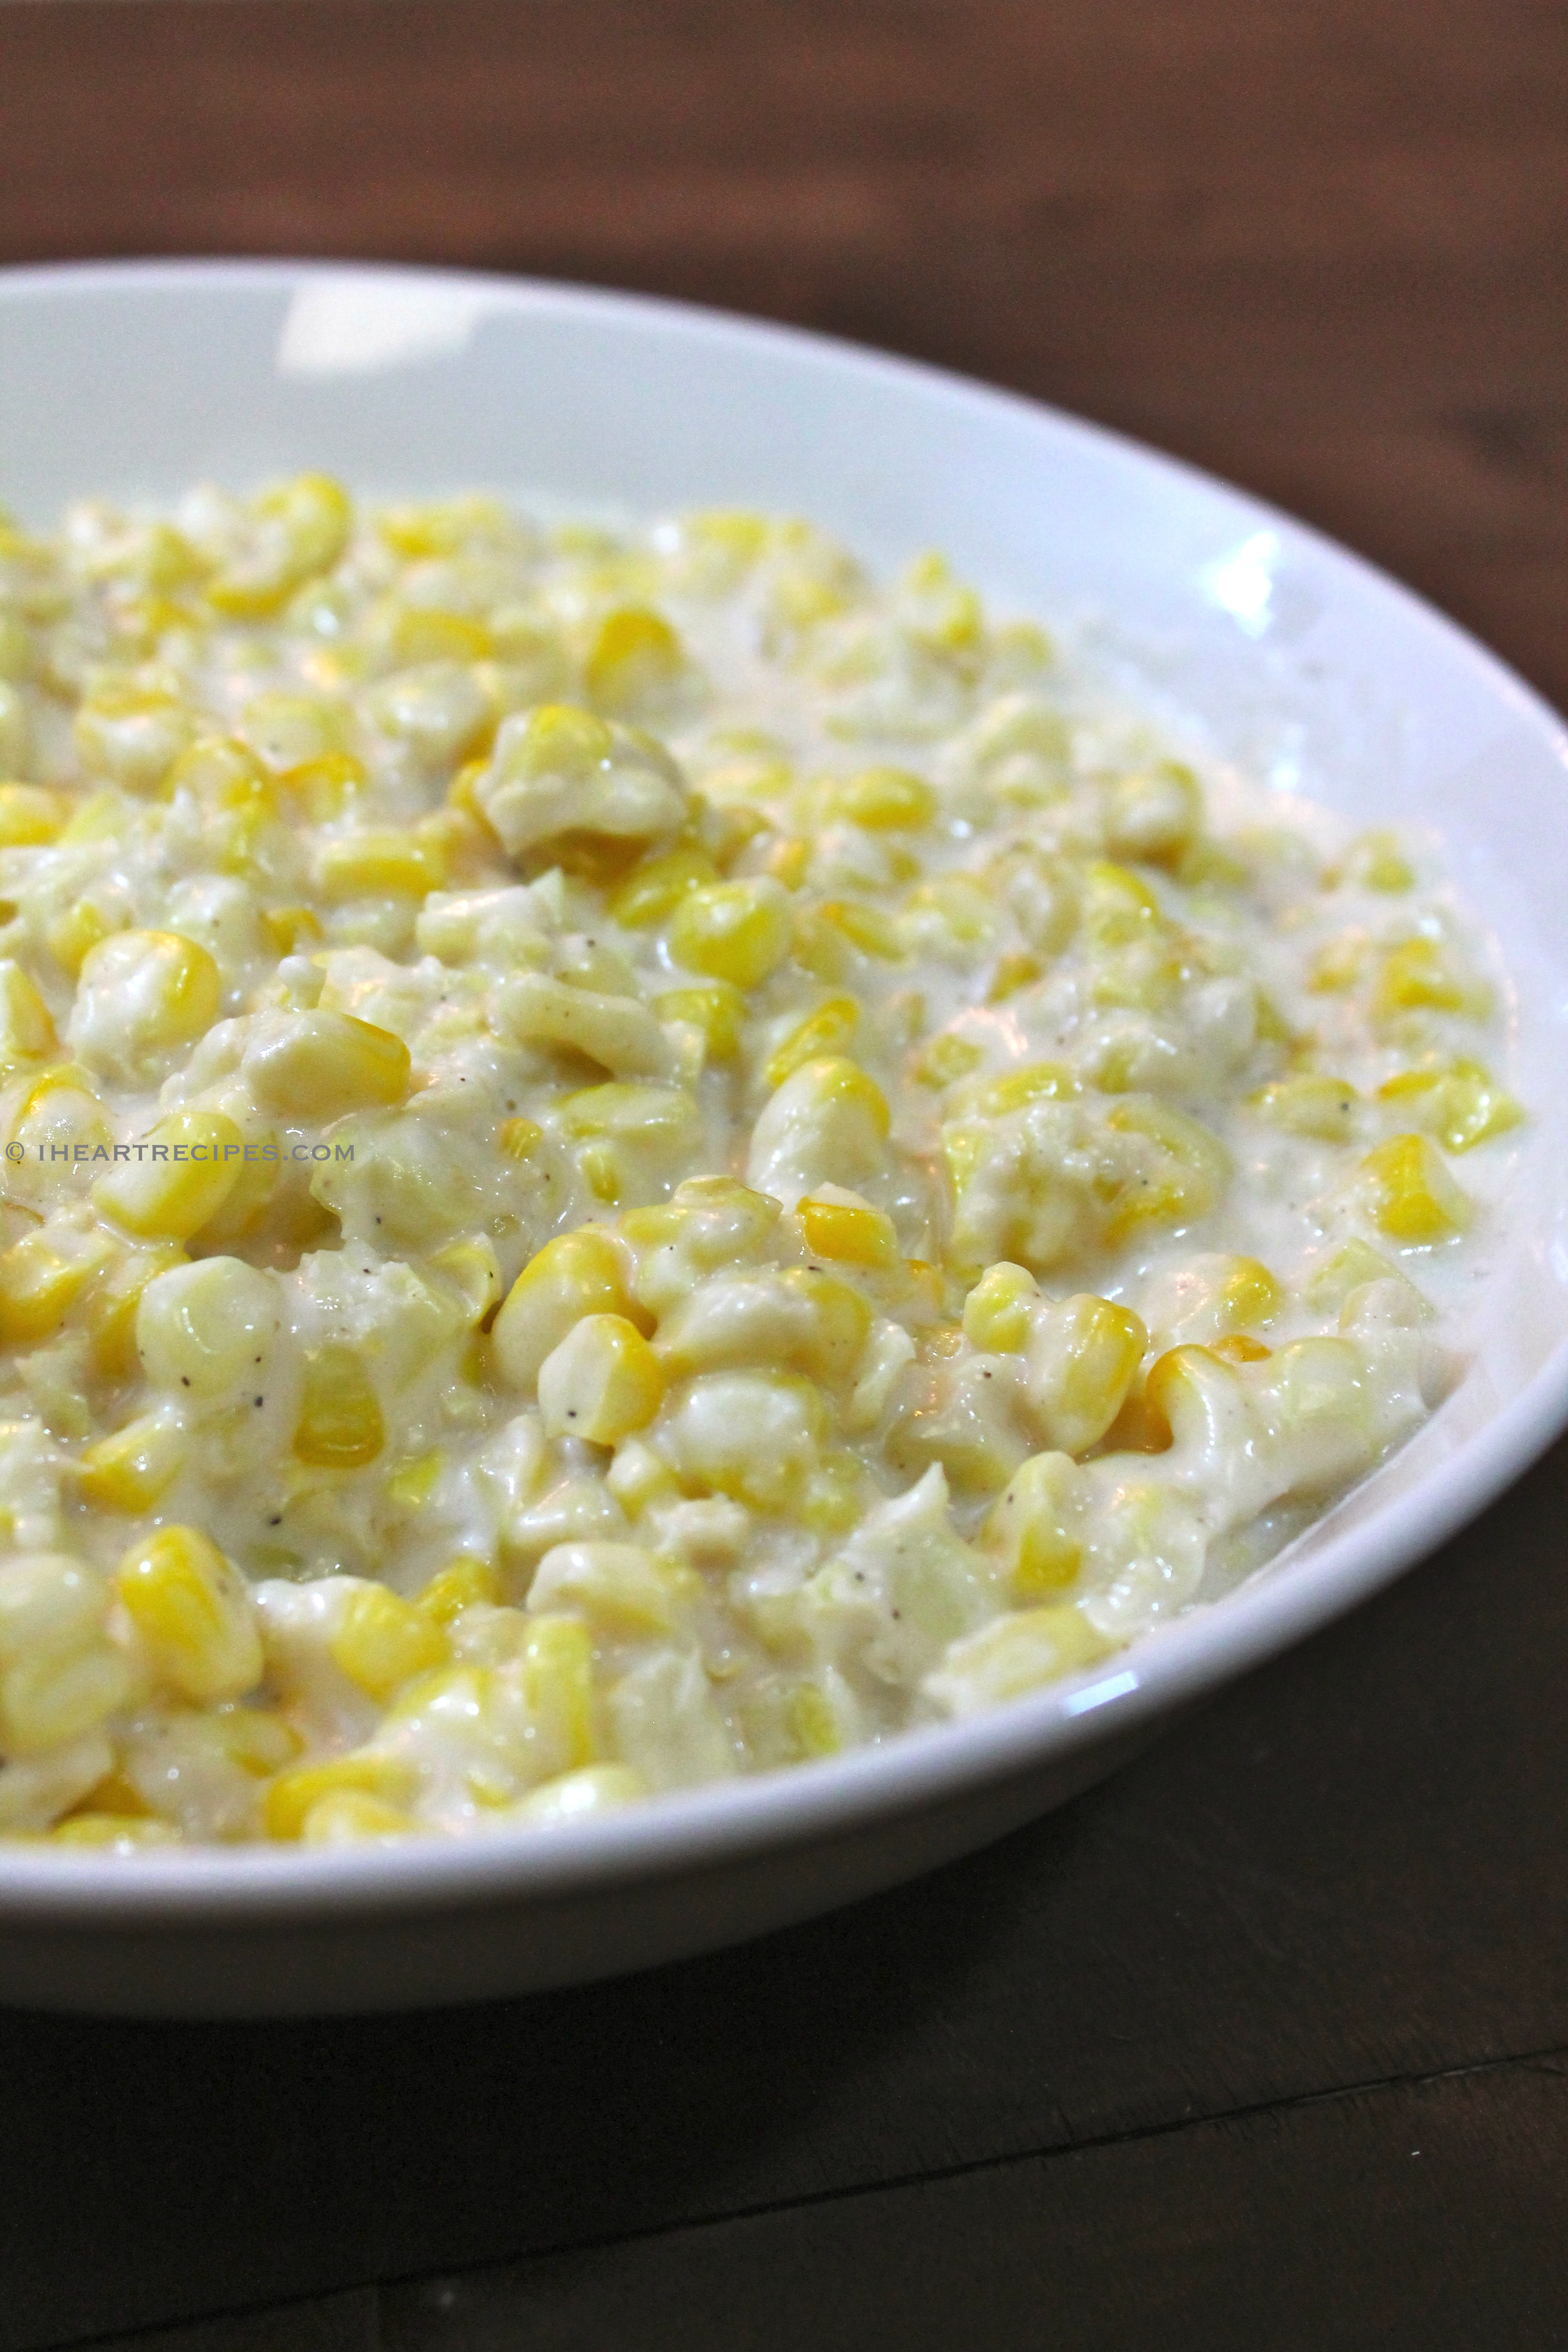 This classic creamed corn recipe will be a new side dish staple on your holiday table